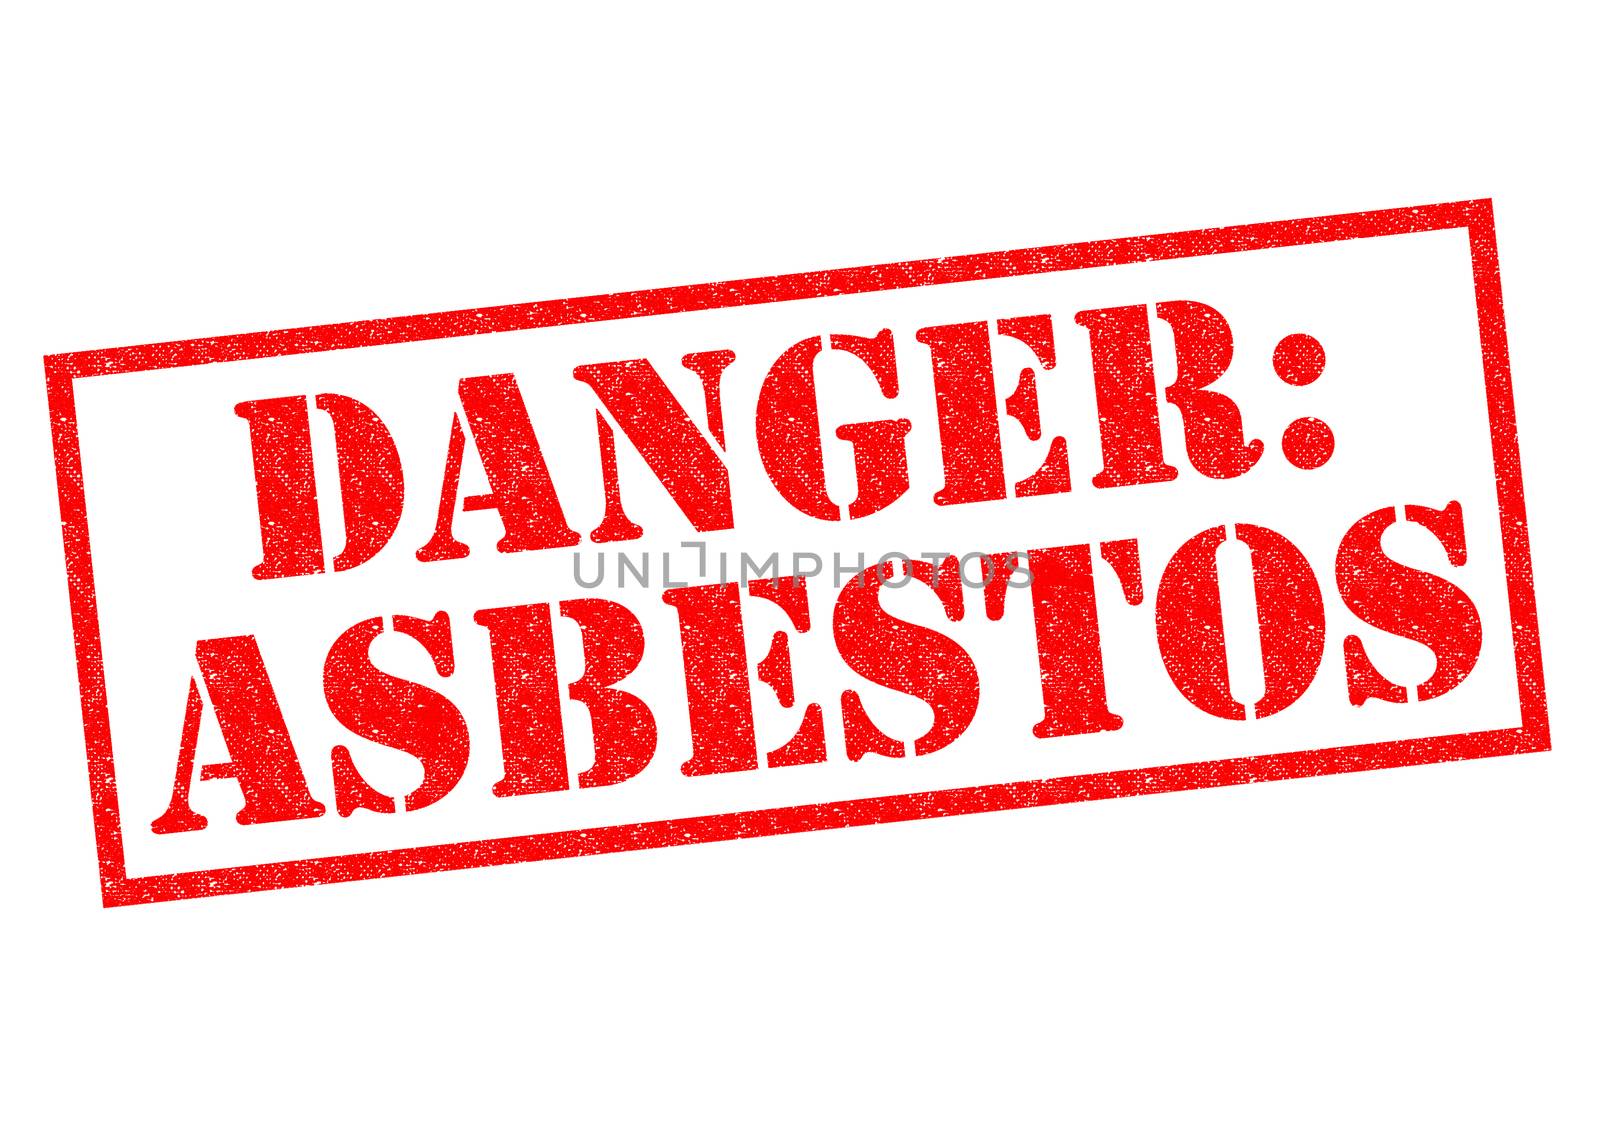 DANGER: ASBESTOS red Rubber Stamp over a white background.